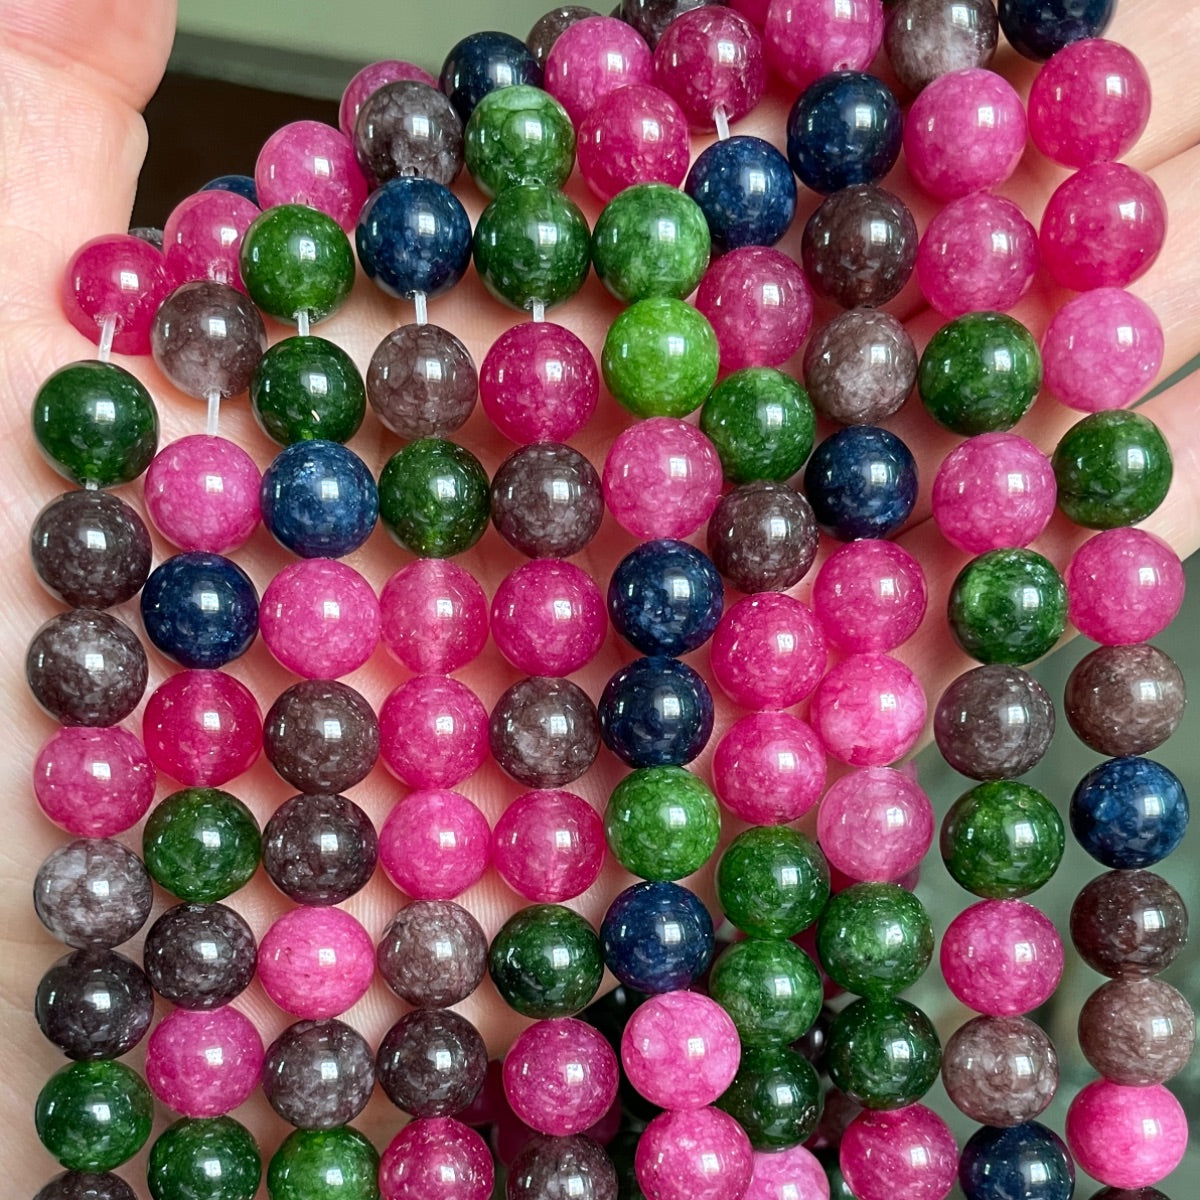 2 Strands/lot 10 Multicolor Hot Pink Brown Blue Green Chalcedony Jade Round Stone Beads Stone Beads New Beads Arrivals Other Stone Beads Charms Beads Beyond